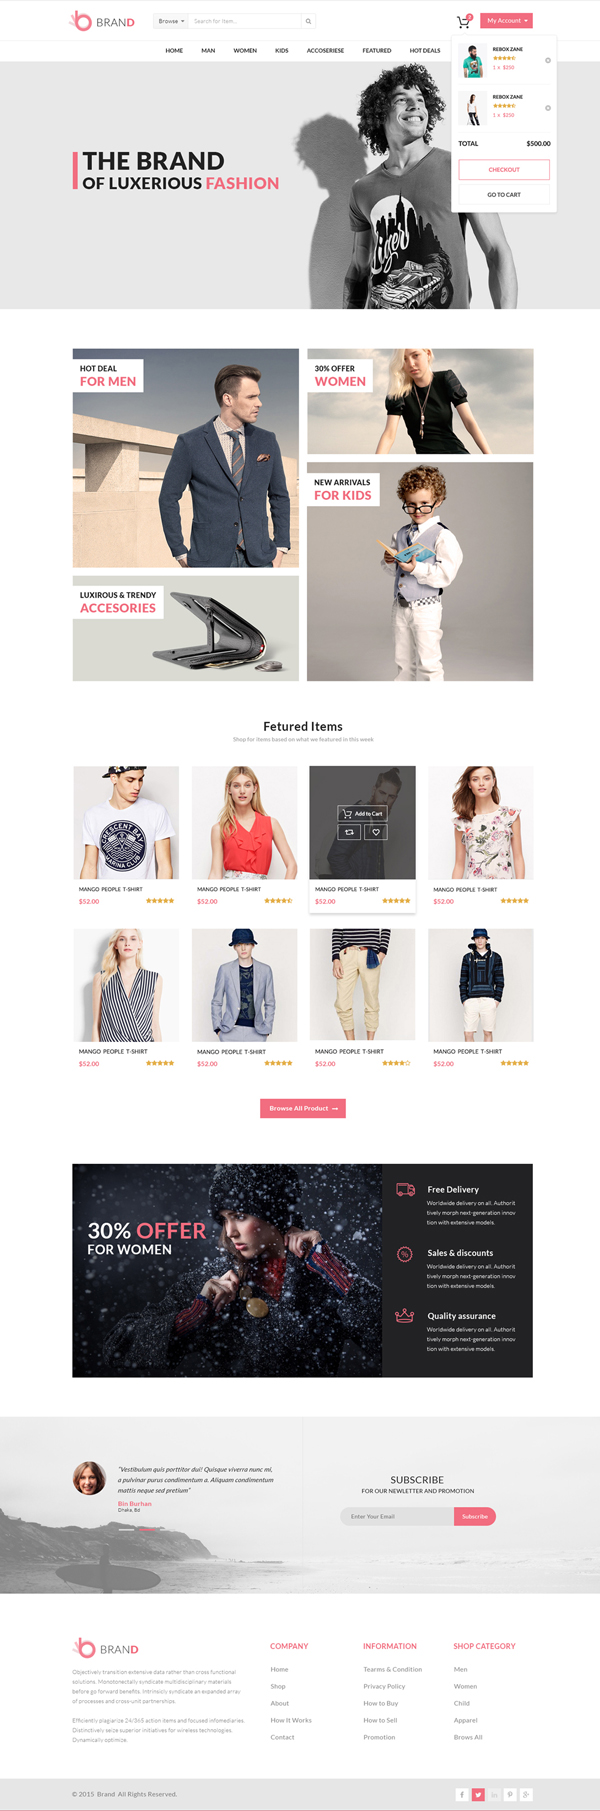 Free eCommerce Template for Fashion Store - Brand